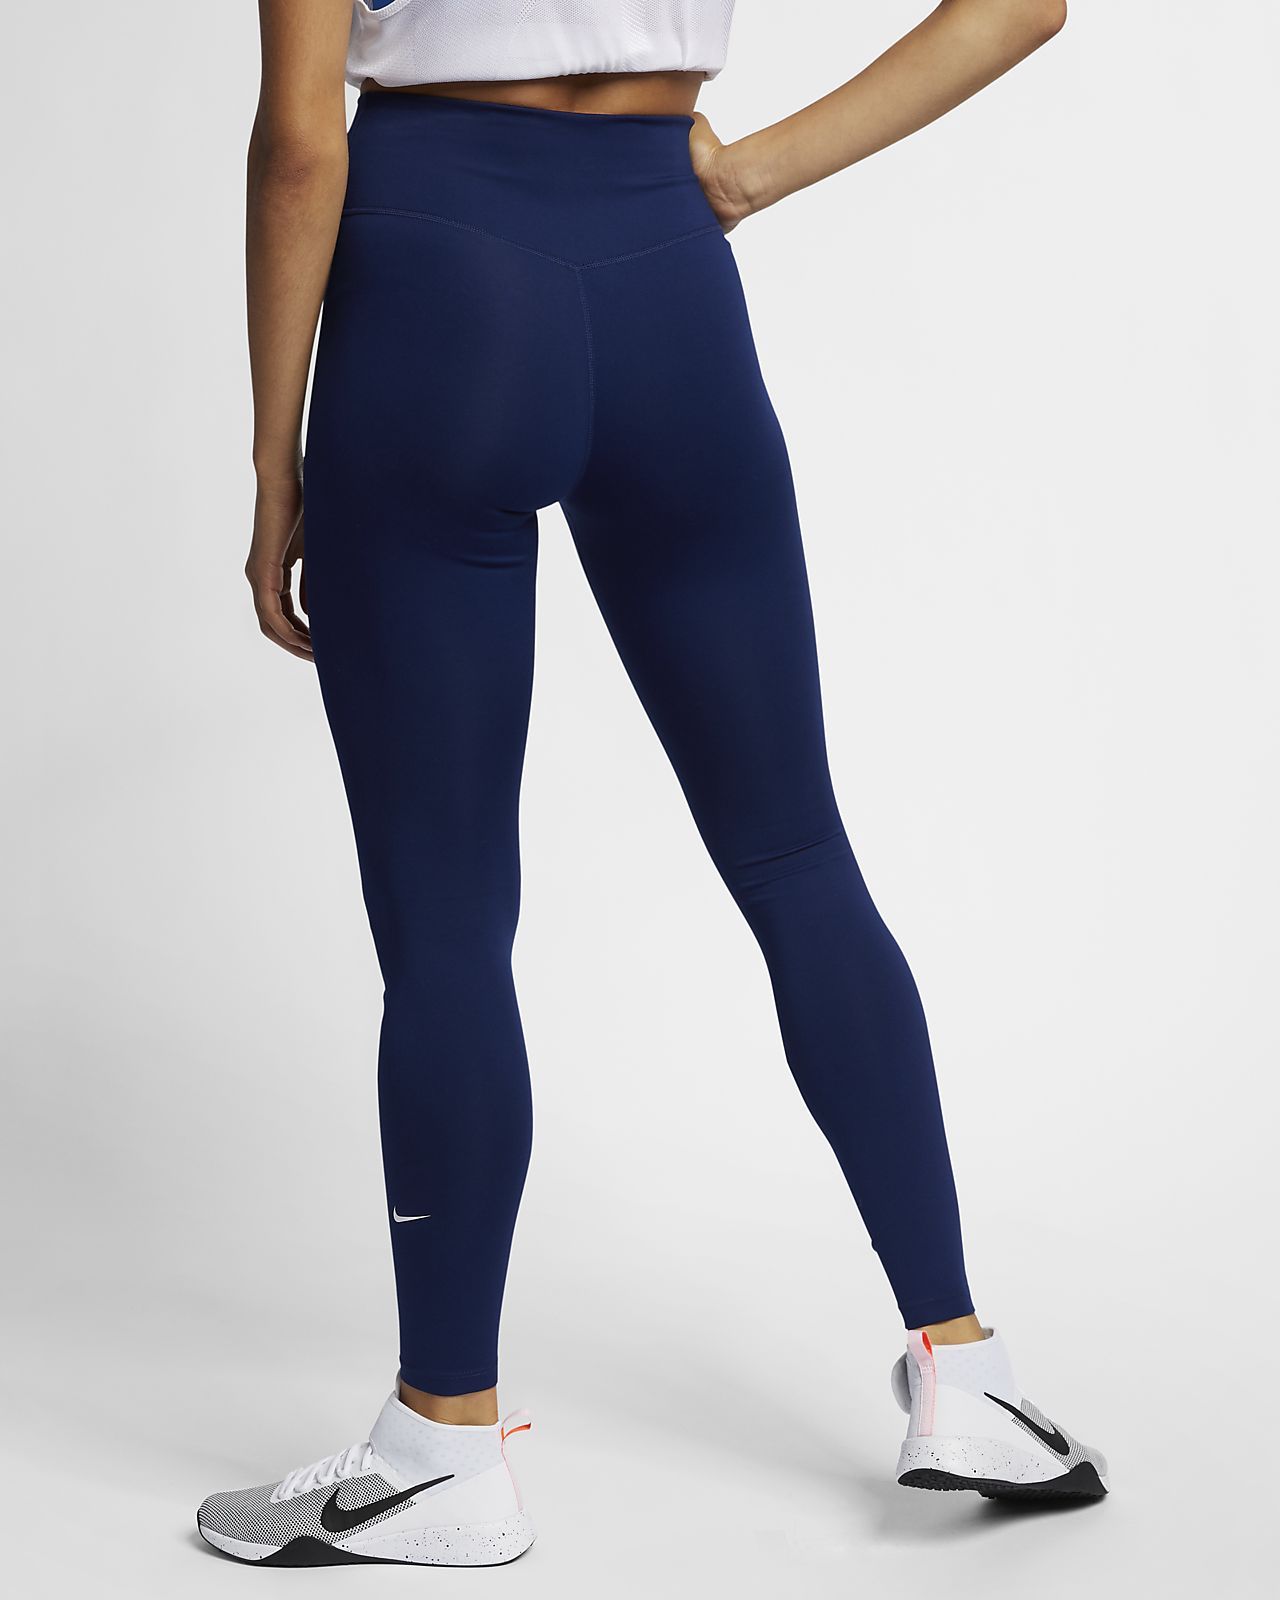 nike one running tights